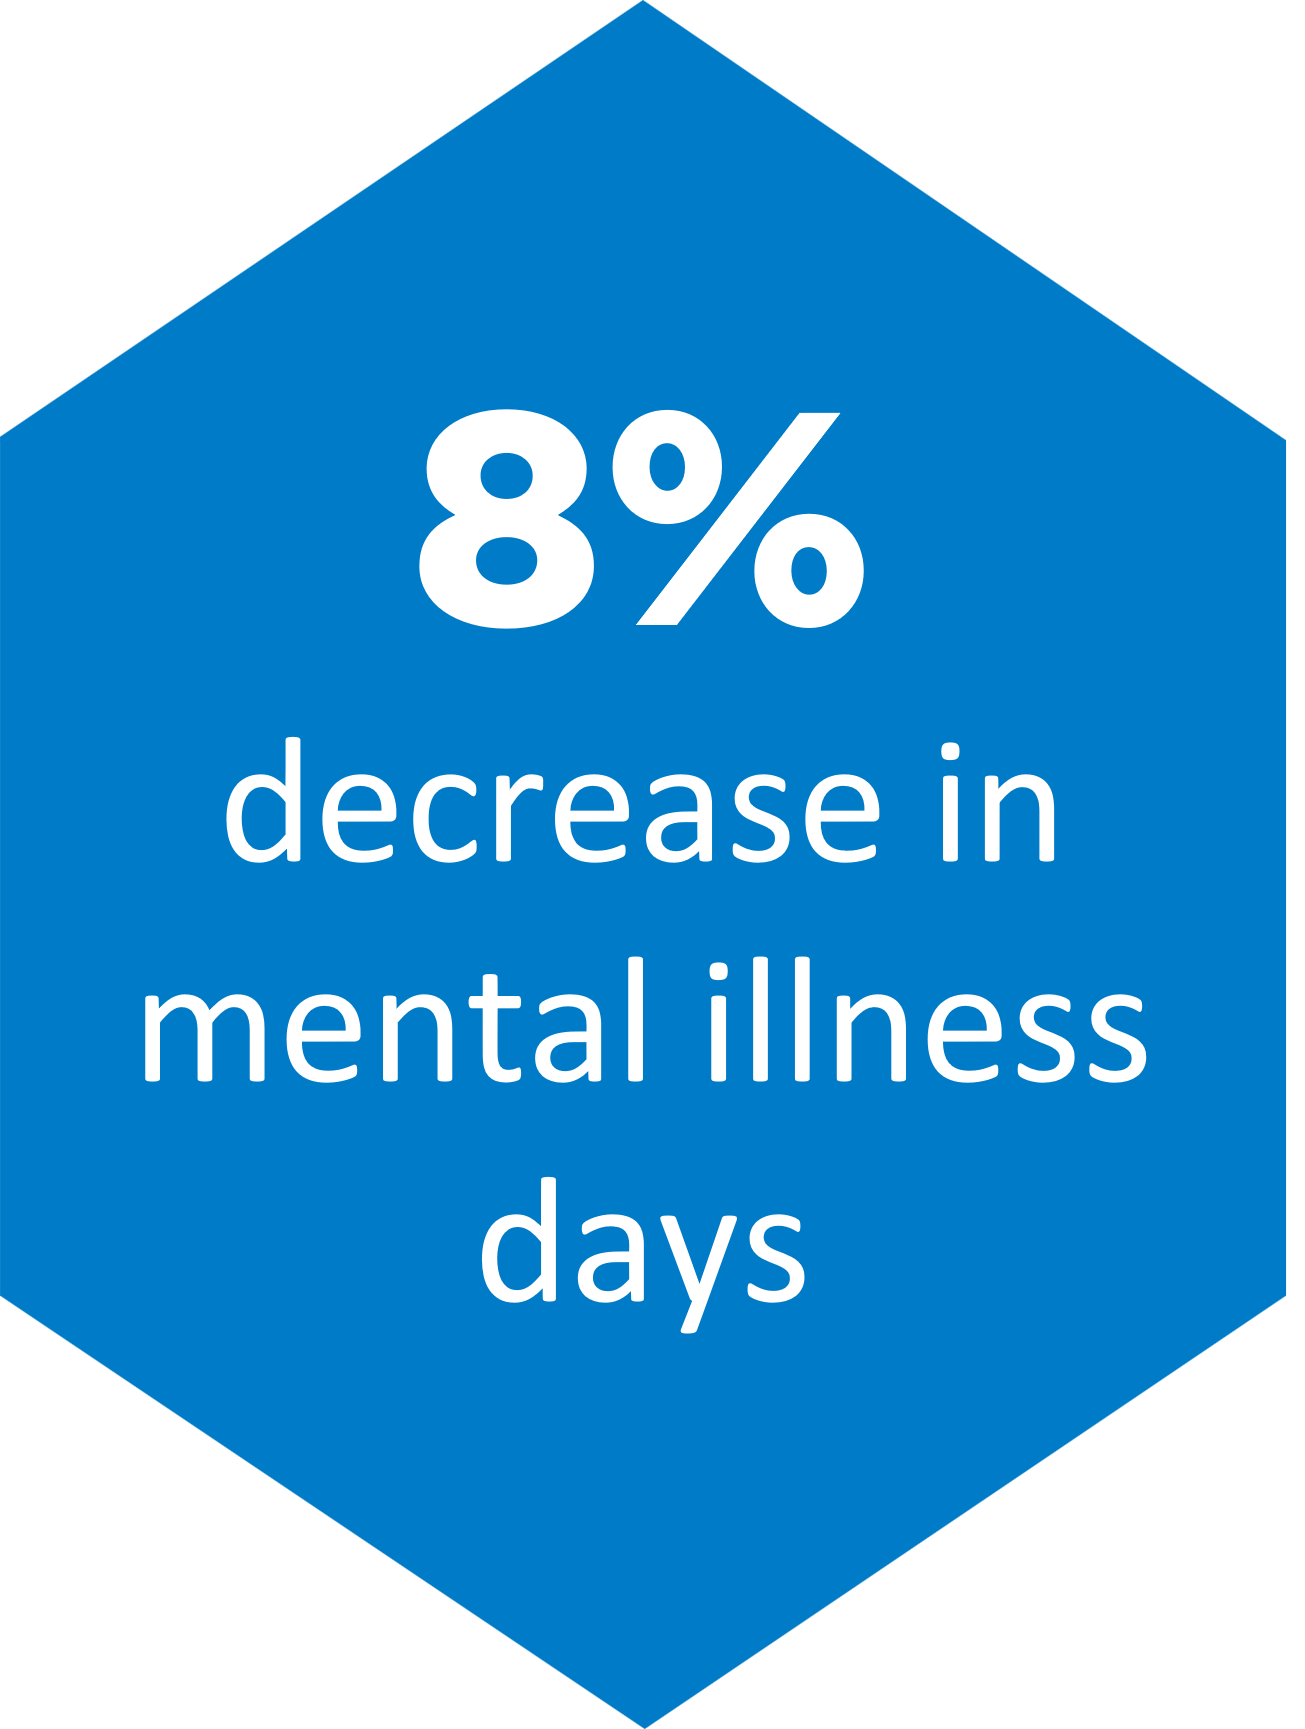 A blue hexagon with white writing within it reading '8% decrease in mental illness days'.